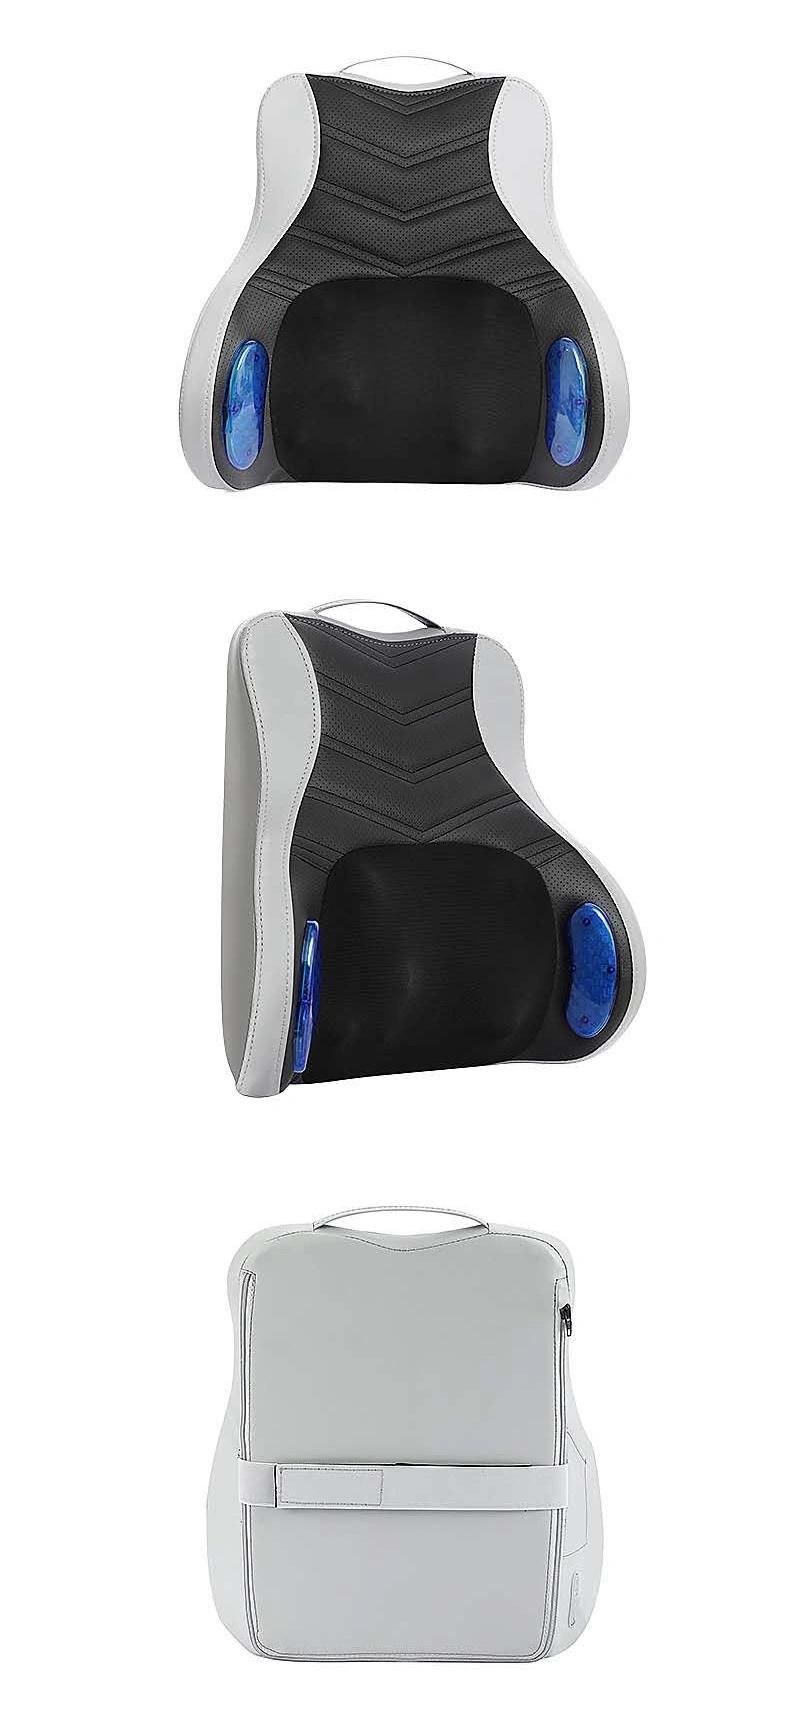 Multifunctional Massage Pillow Hot Compress Kneading and Beating Massager Car Home Dual-Use Cushion